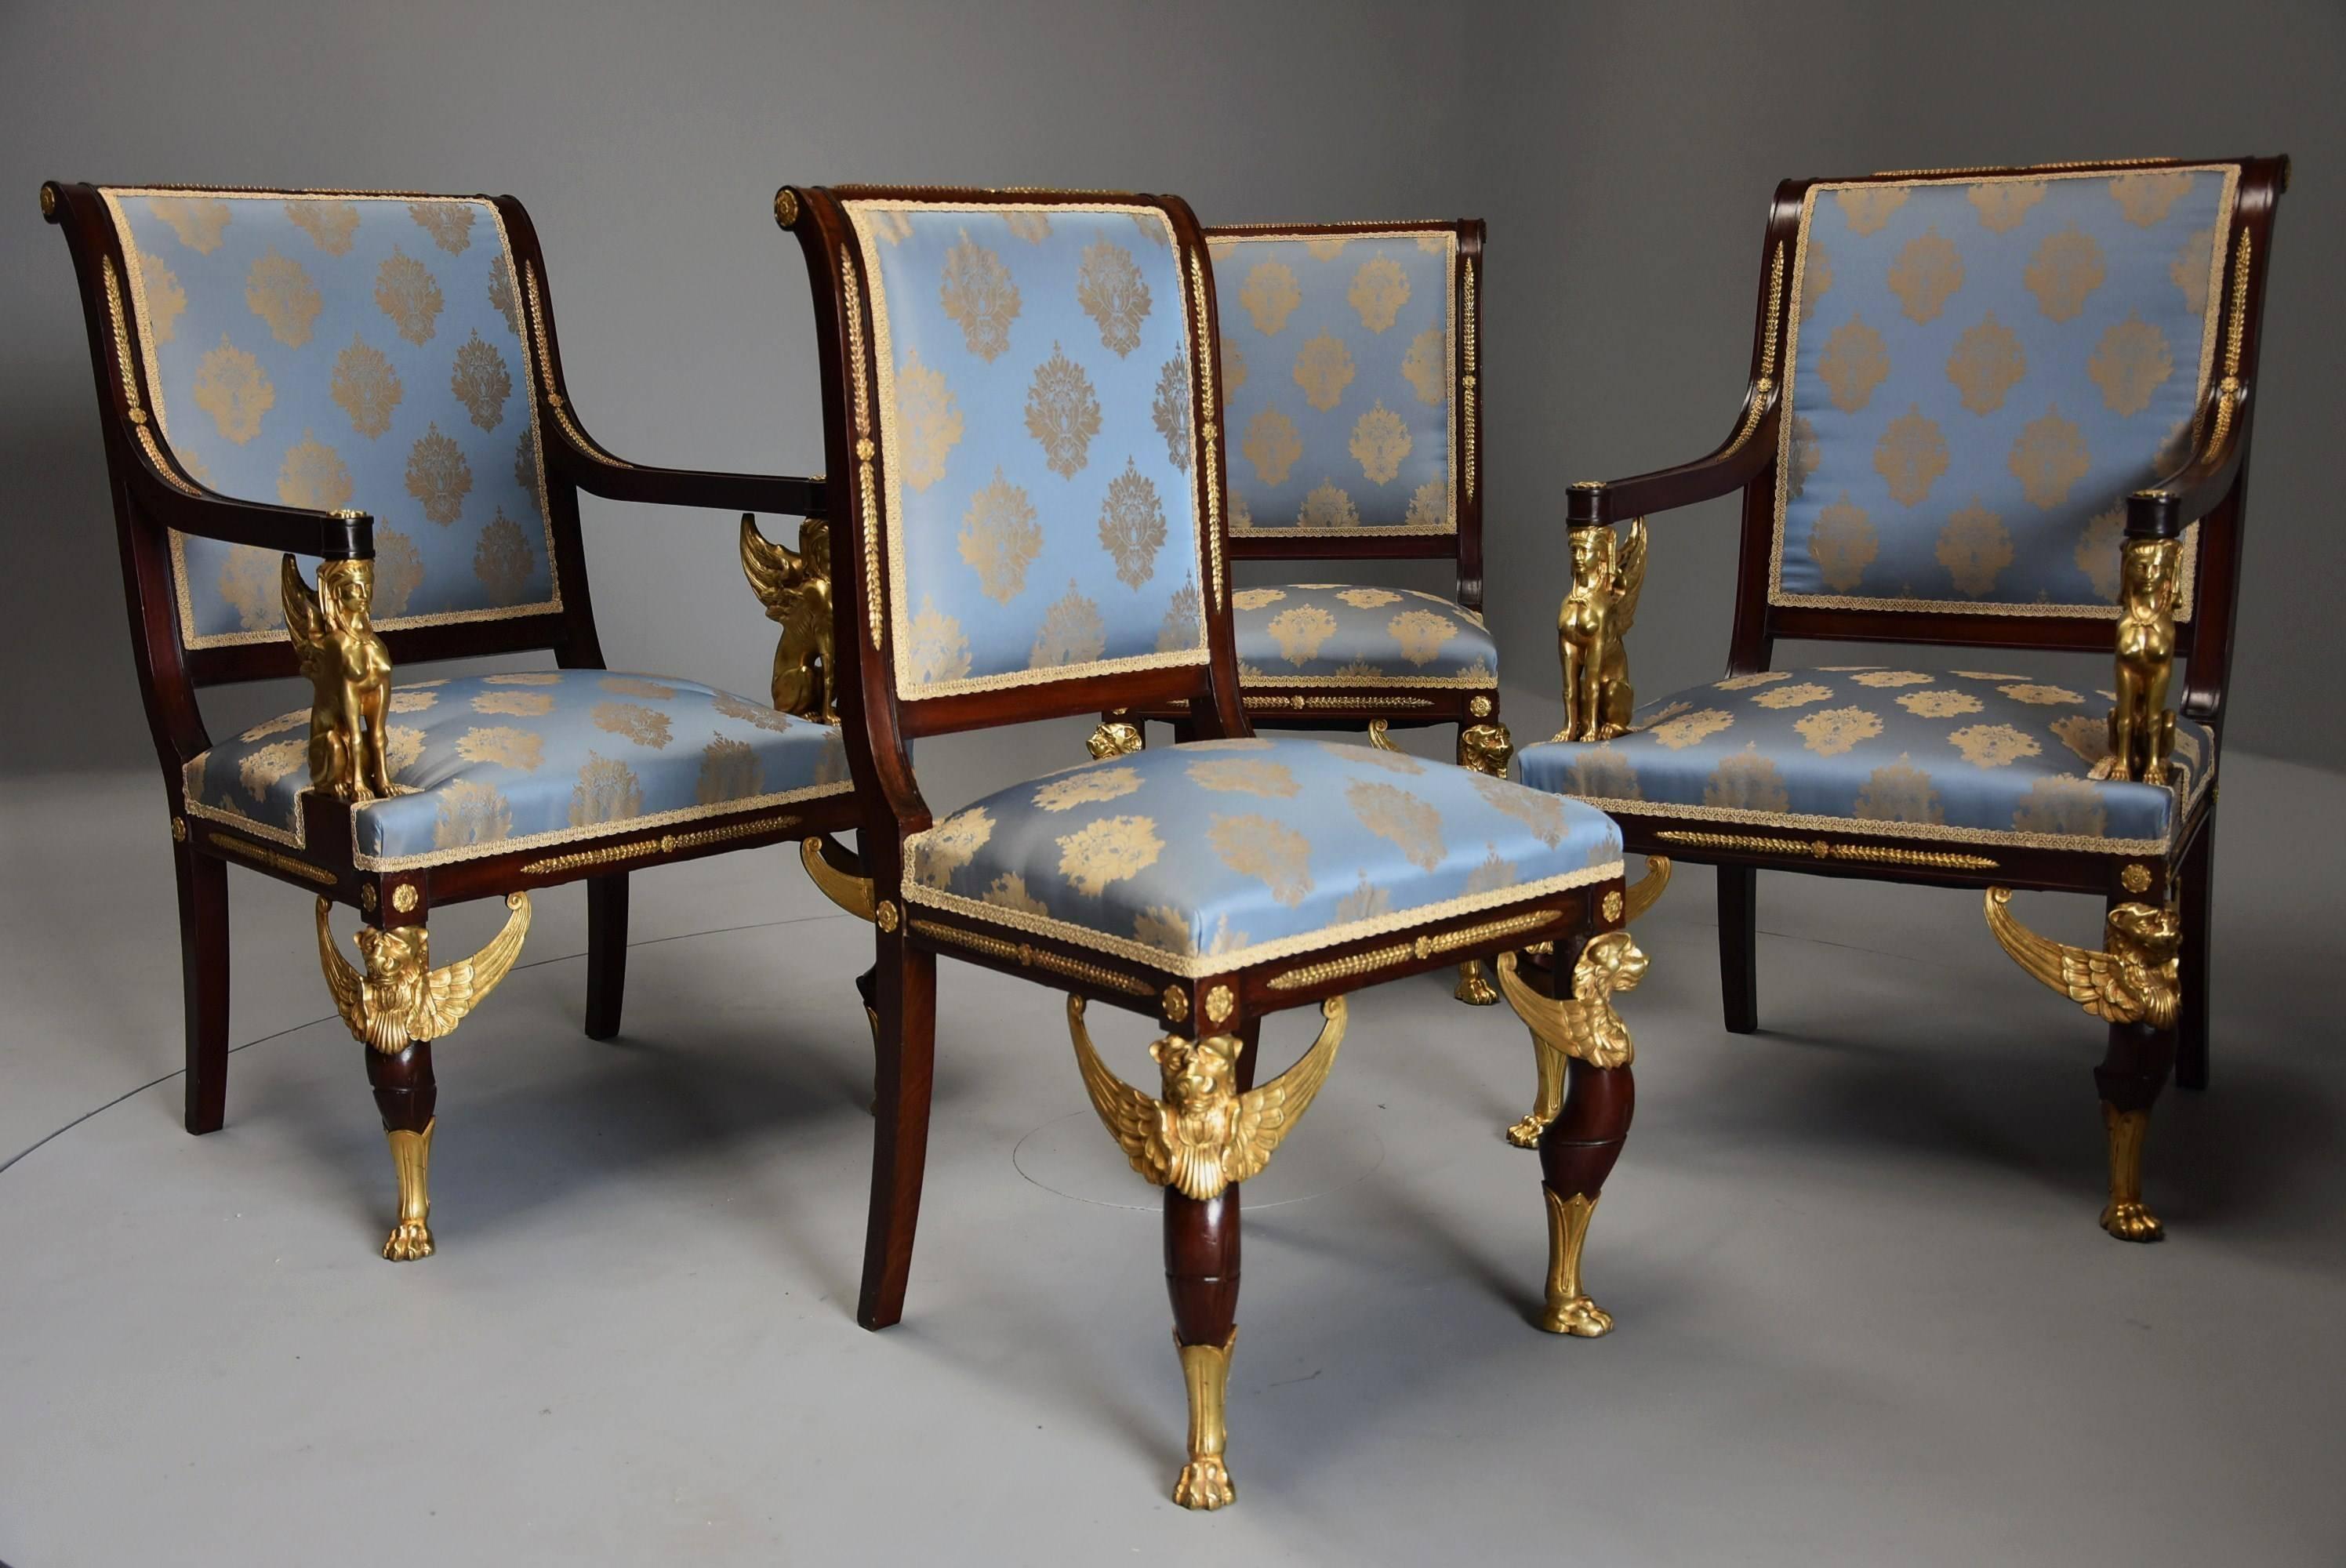 An excellent quality late 19th century set of four highly decorative English mahogany chairs in the French Empire style with superb ormolu mounts by EH Kahn & Co, London.

This set of chairs consists of of two armchairs and two single chairs